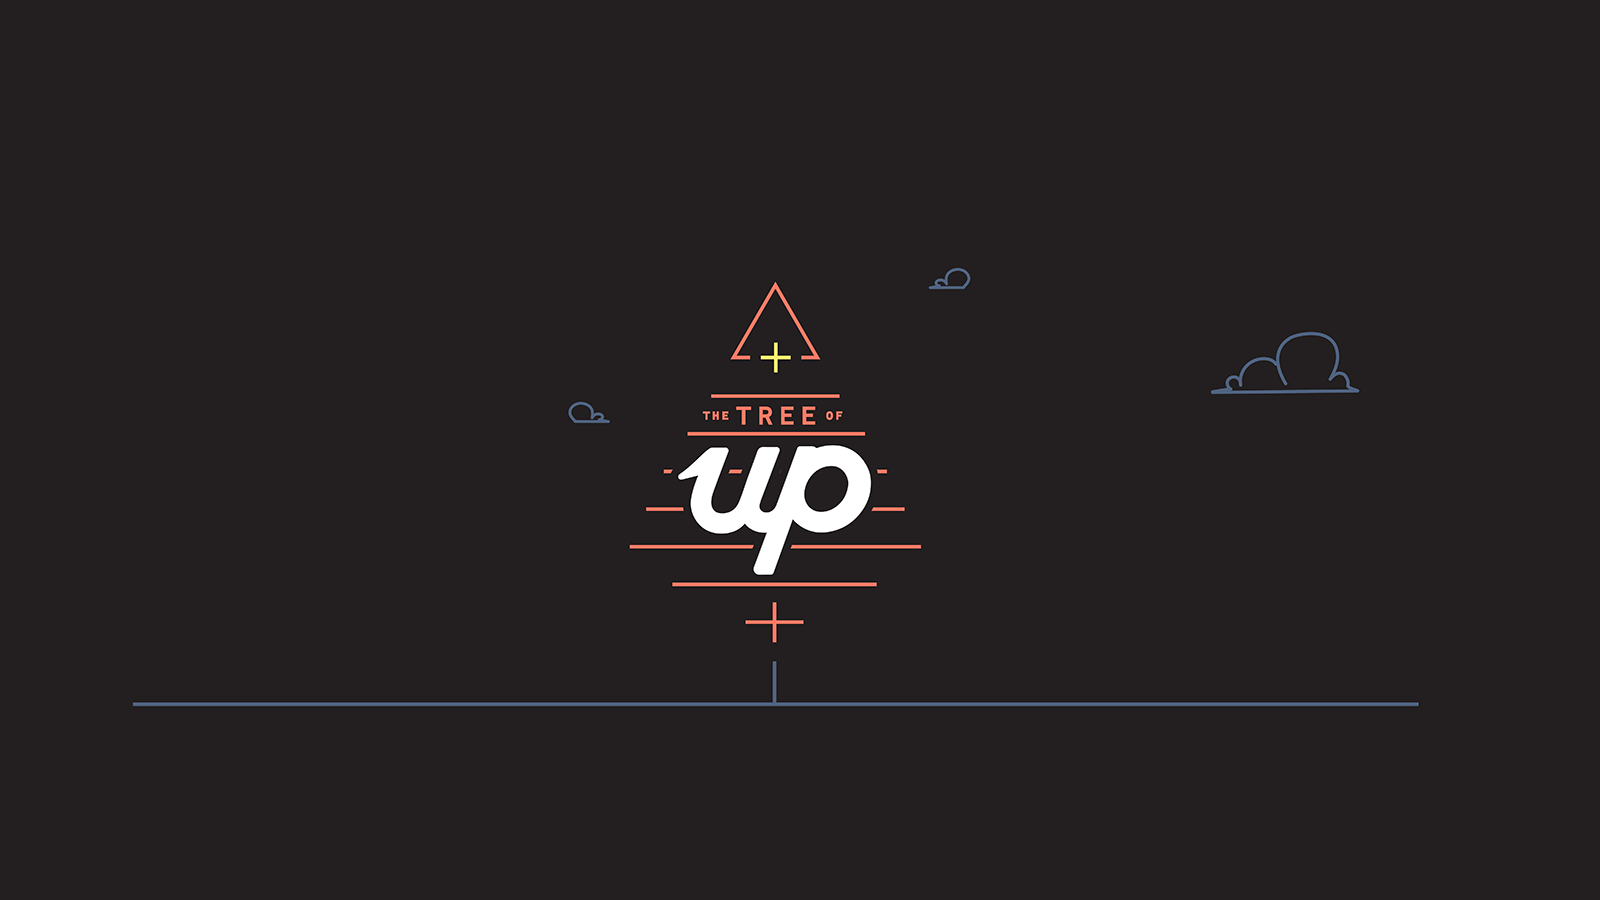 Introducing the Up product roadmap